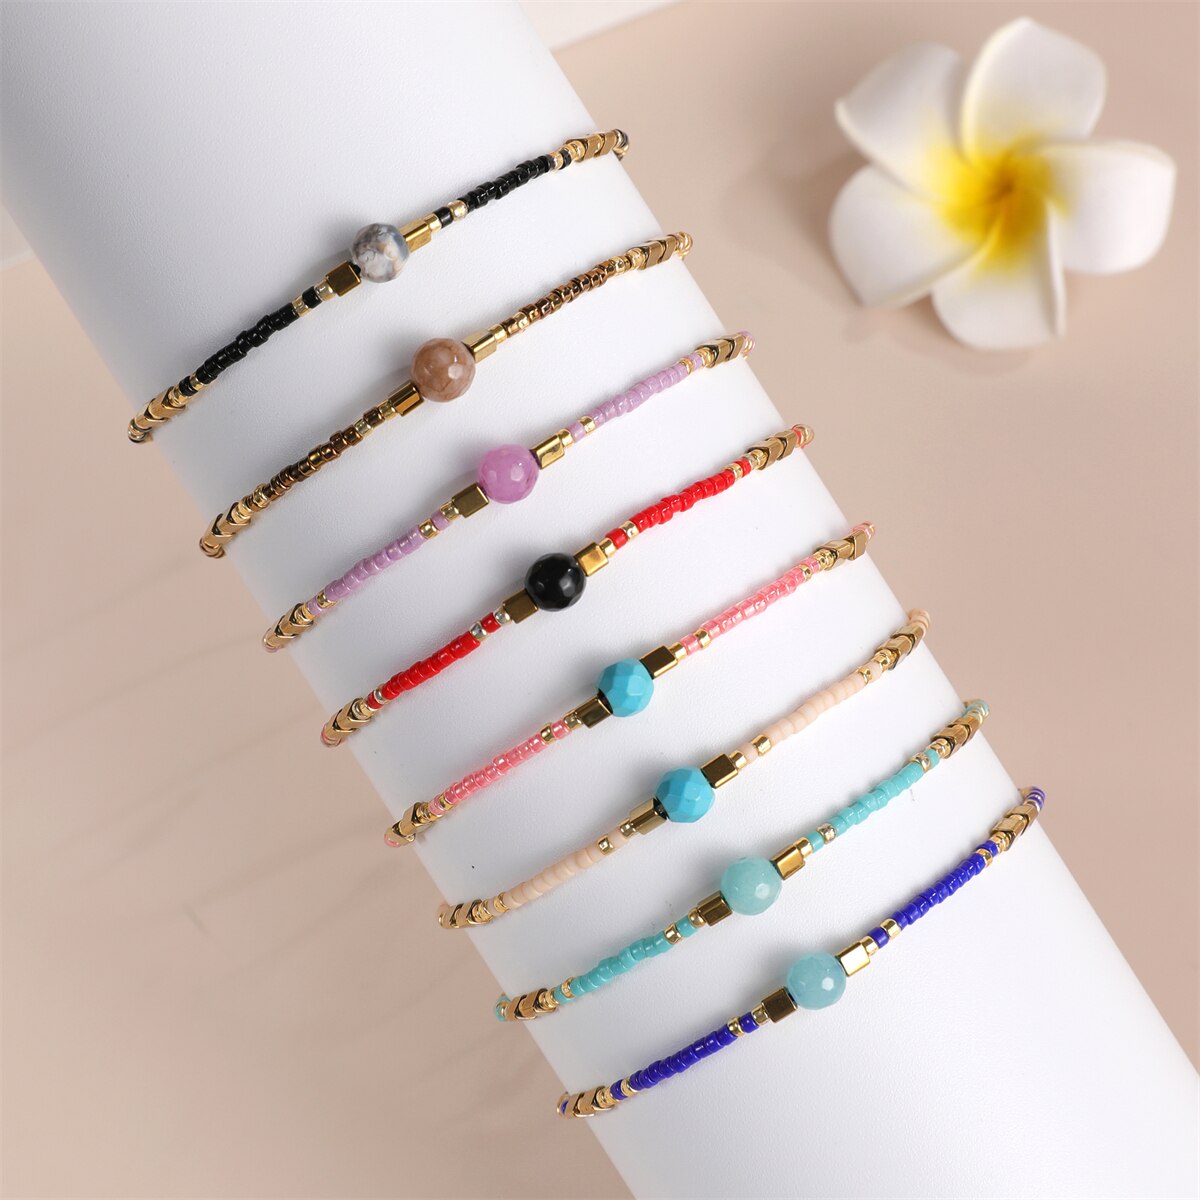 Women Seed Bead Charms Bracelet Adjustable Metal Tiger Eye Chain Anklets Girl Kids Beach Couple Jewelry Gift 1pc